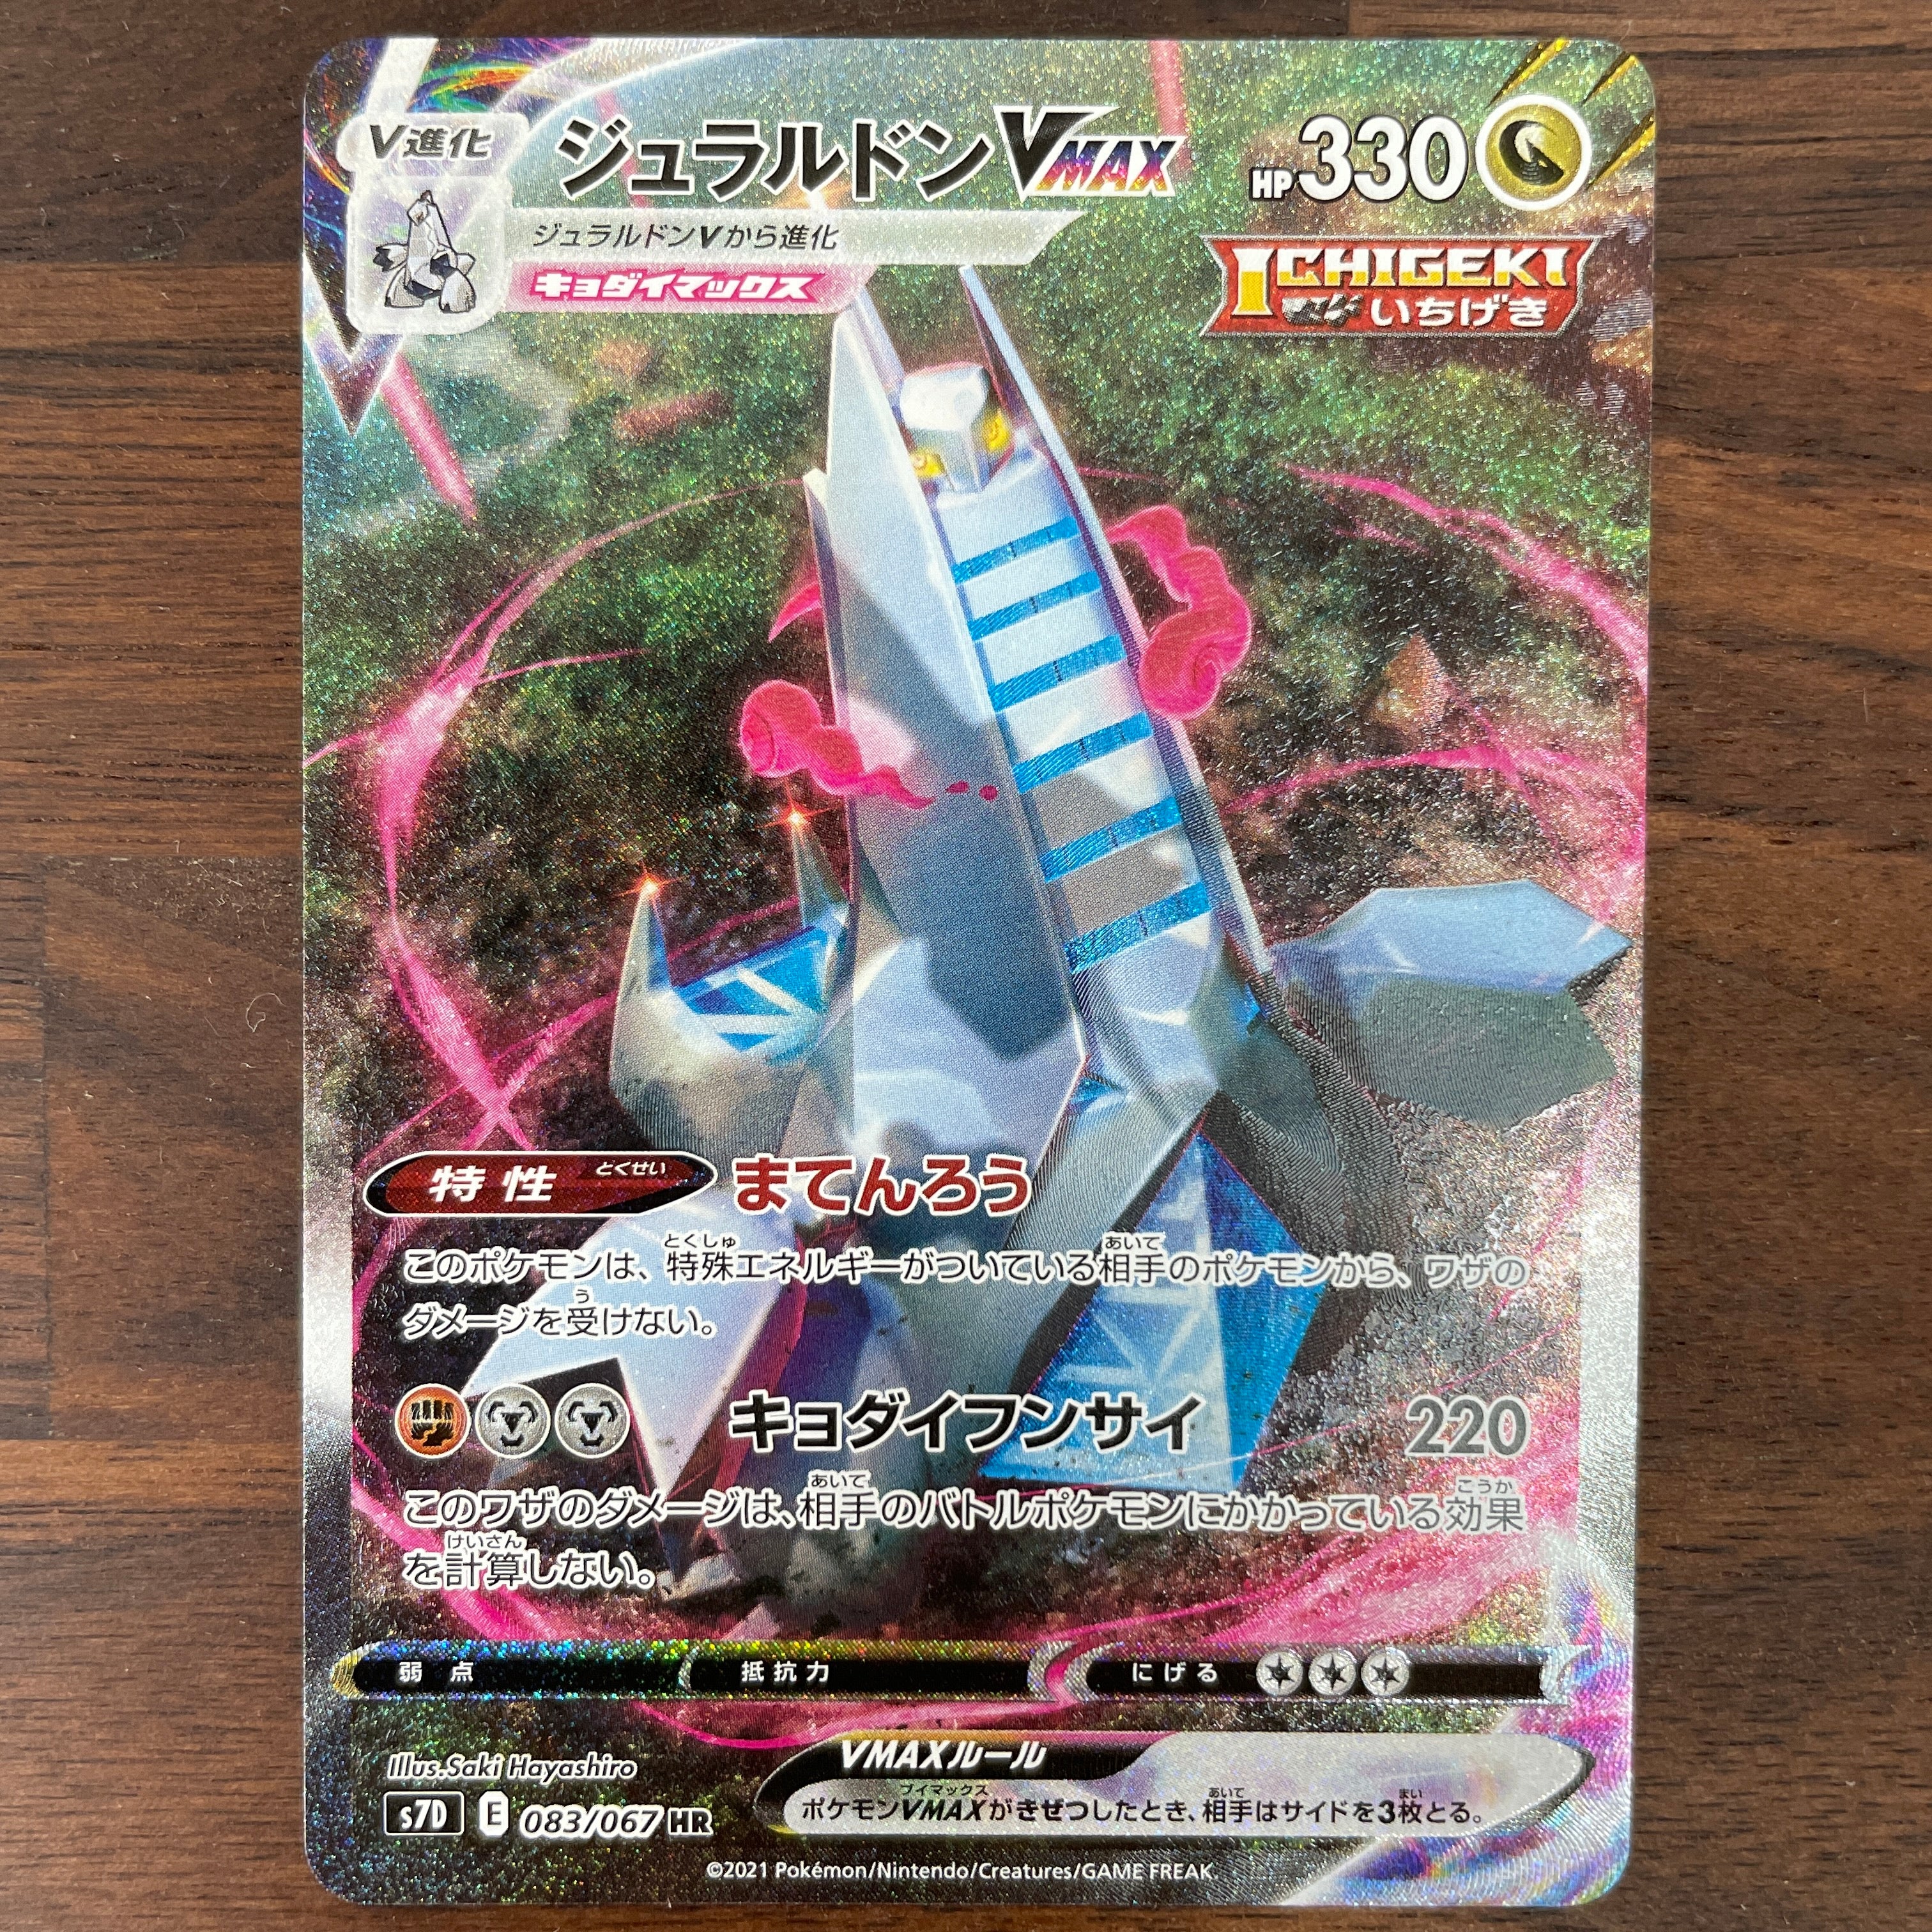 POKÉMON CARD GAME Sword & Shield Expansion pack ｢Skyscraping Perfect｣  POKÉMON CARD GAME S7D 083/069 Hyper Rare card  Duraludon VMAX